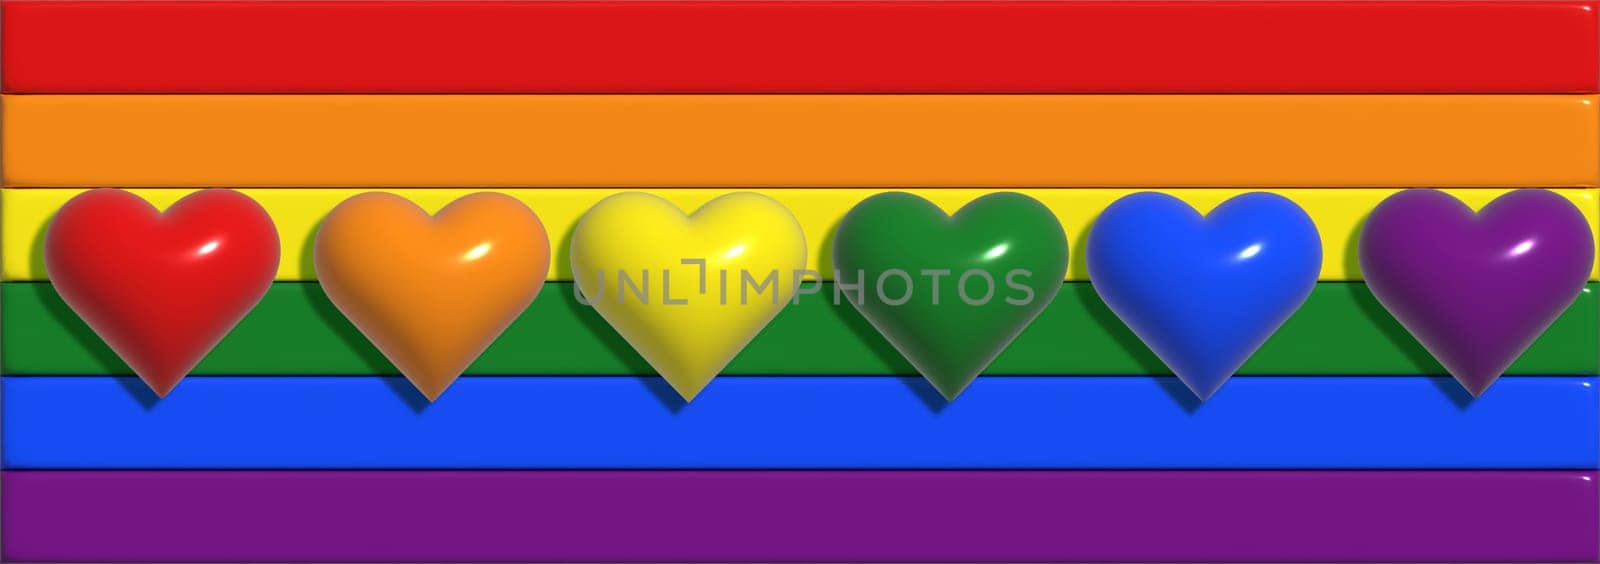 Multi-colored flag is a symbol of LGBT social movements, reflecting the diversity of the LGBT community and the spectrum of human sexuality and gender. 3D rendering illustration